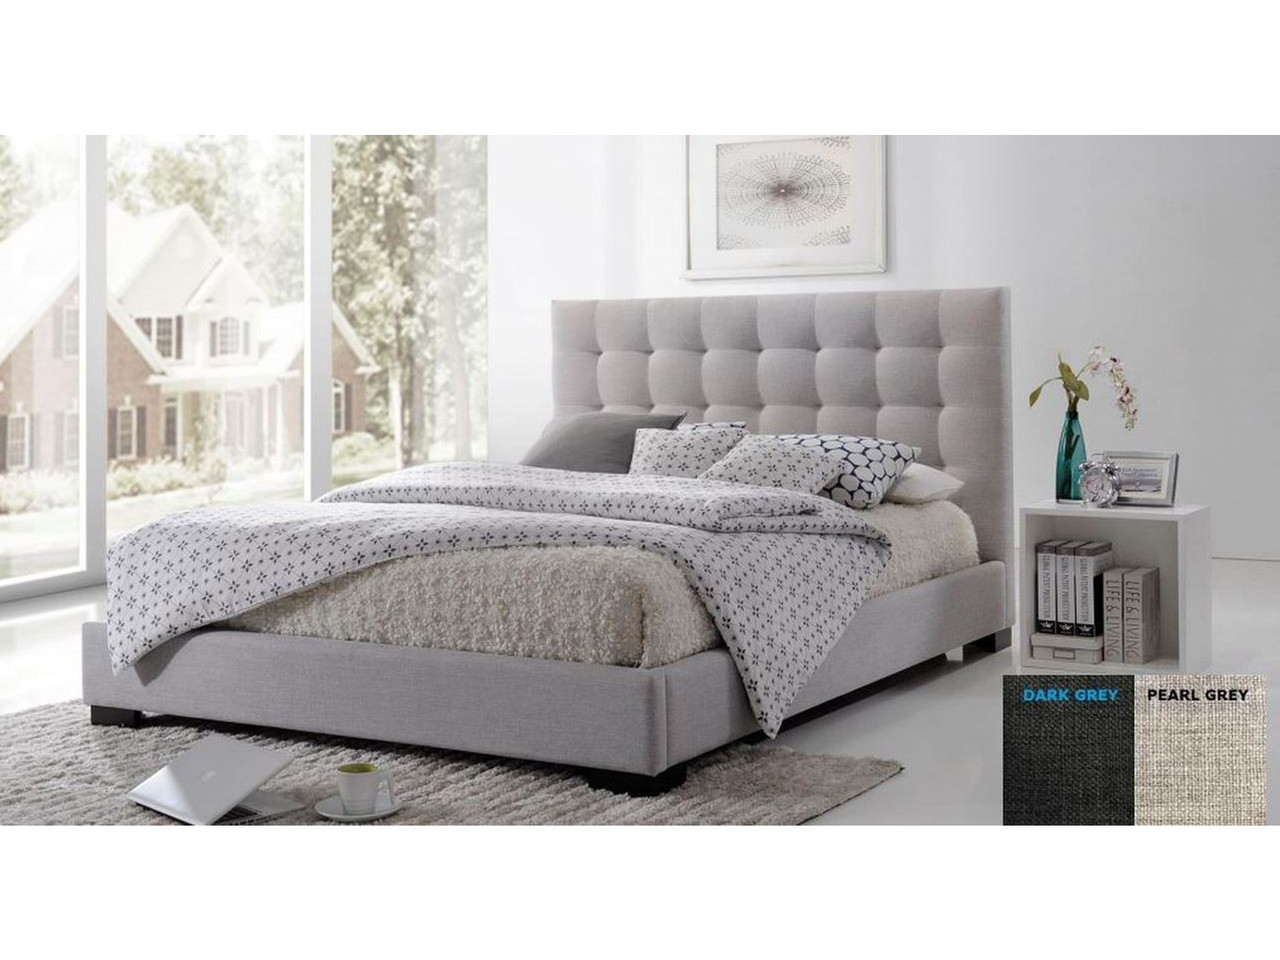 QUEEN SEAWIND LINEN FABRIC BED - (MODEL:13-5-13-16-8-9-19) - PEARL (LIGHT  GREY) OR DARK GREY - My Furniture Store - Furniture and Bedding Super Store  - Australia